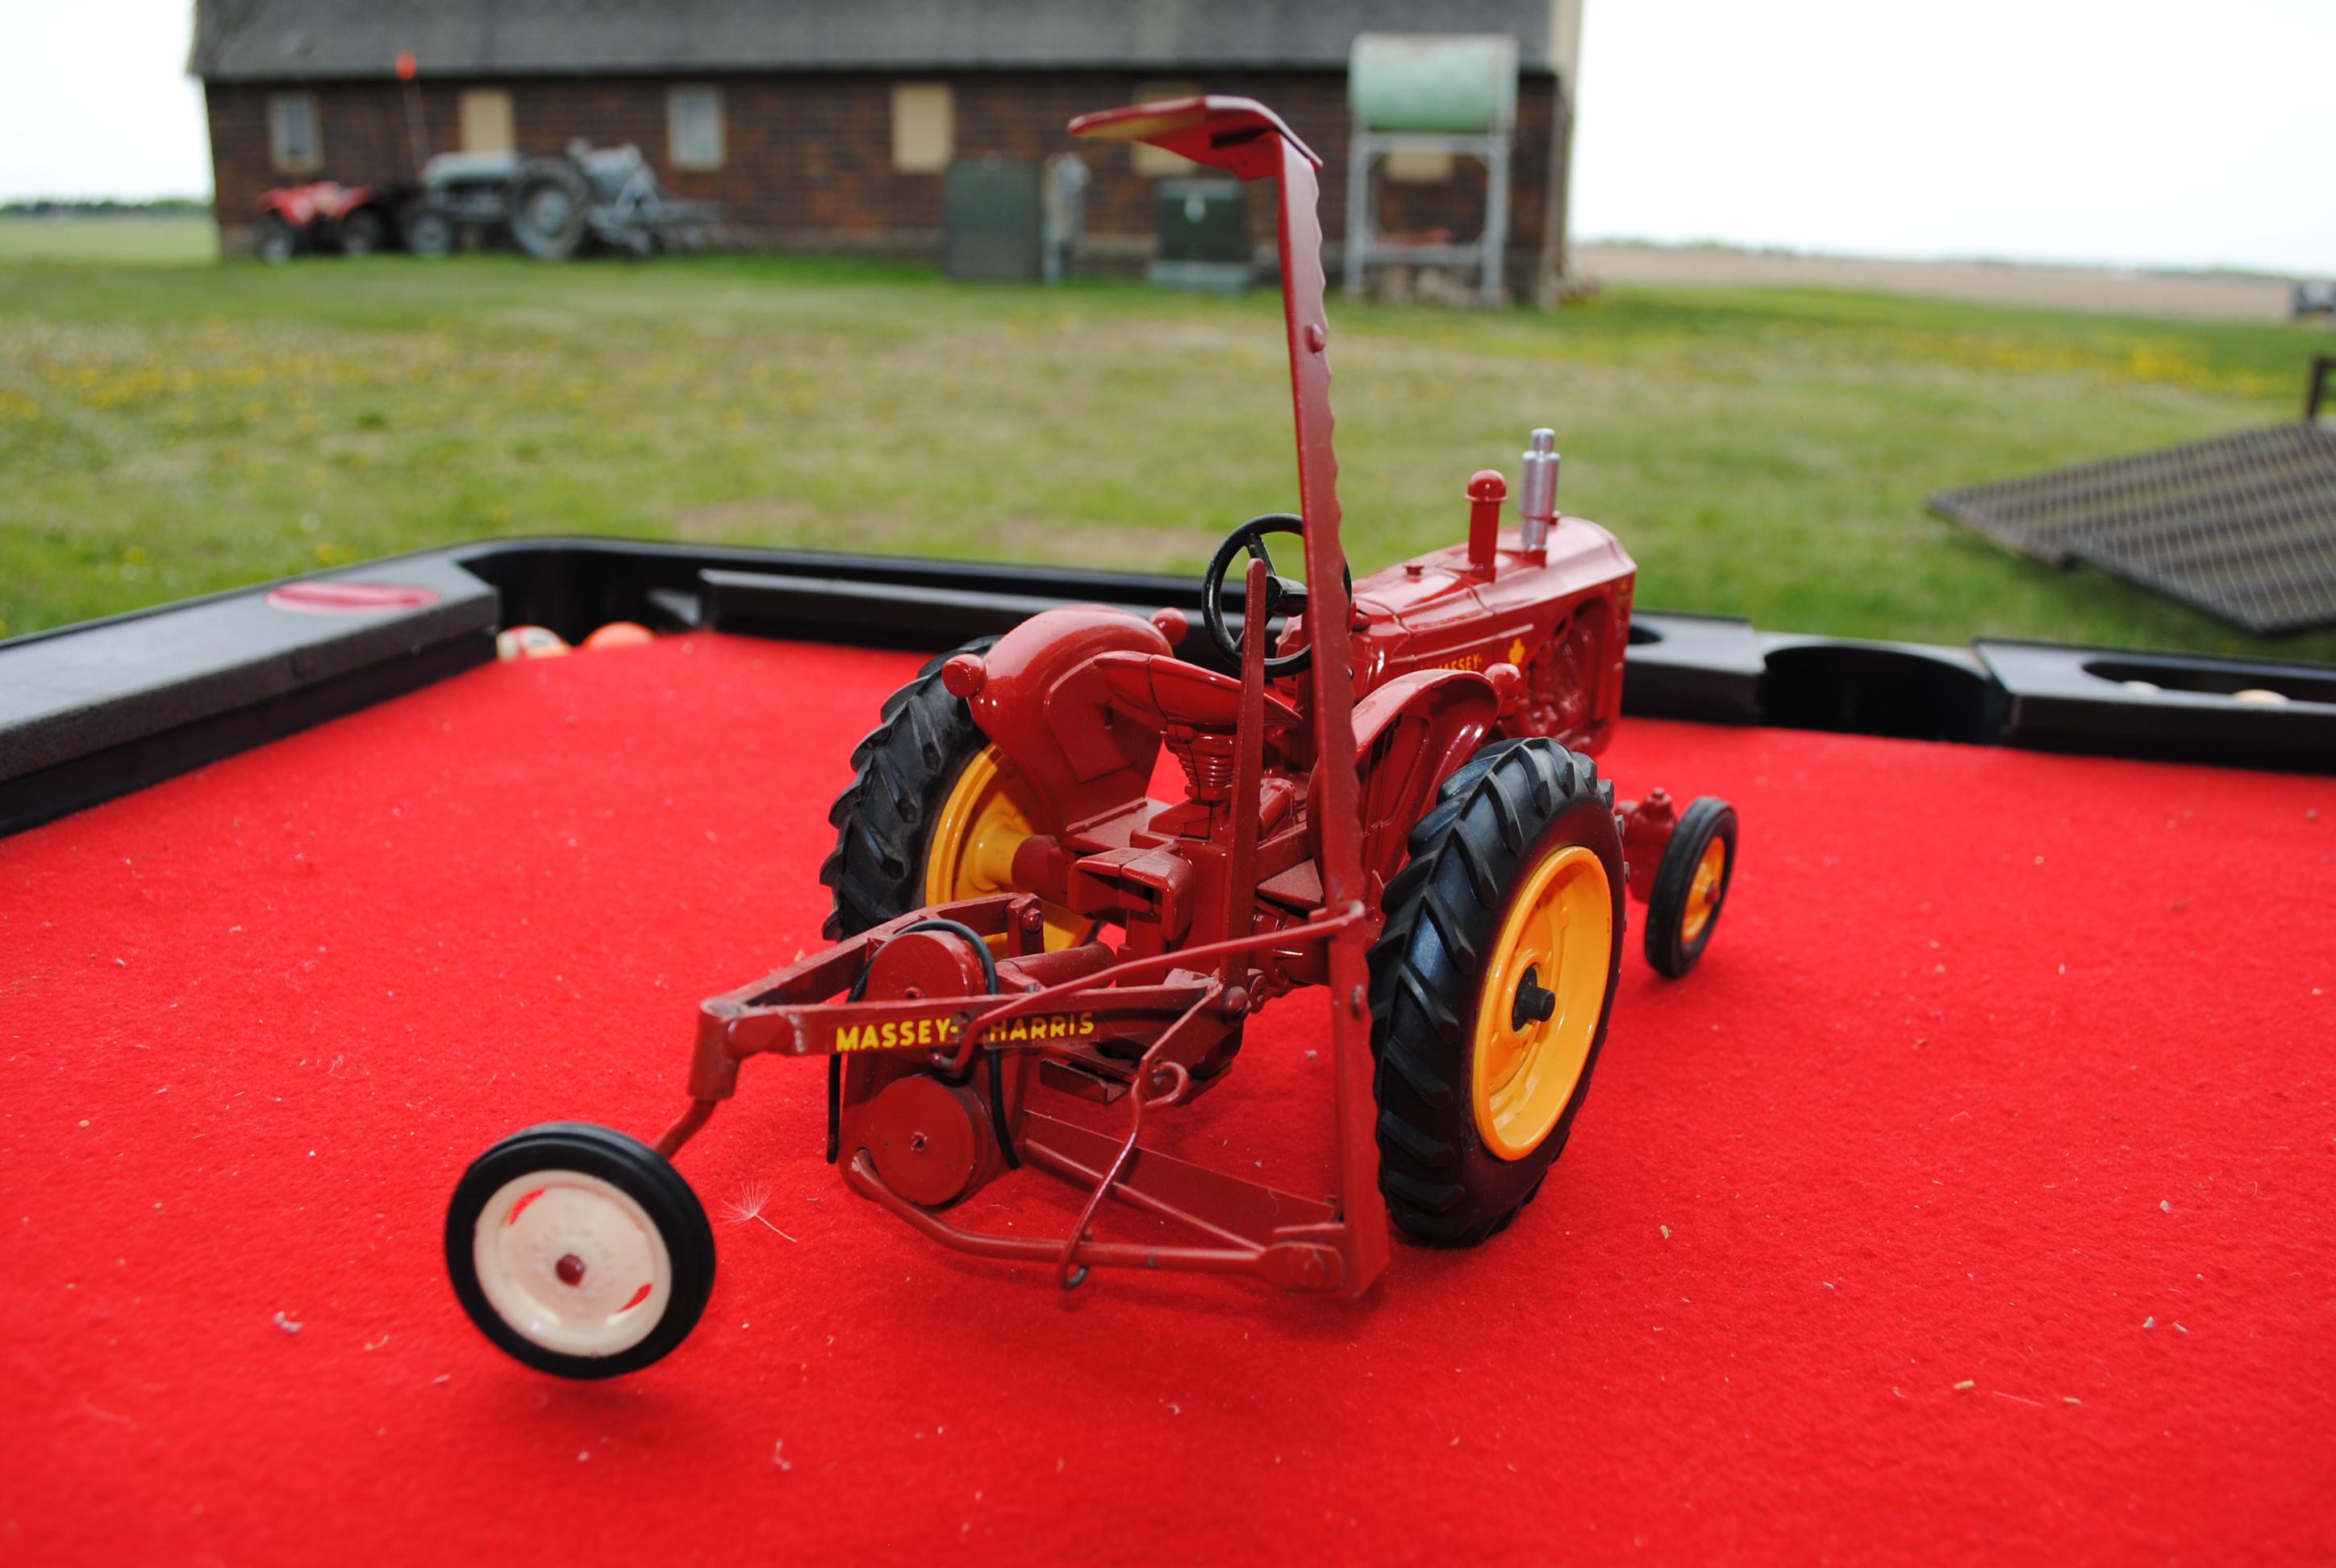 1/16 Massey Harris 44 Special with sickle mower, 1/16 Massey Harris 55 gold colored diesel